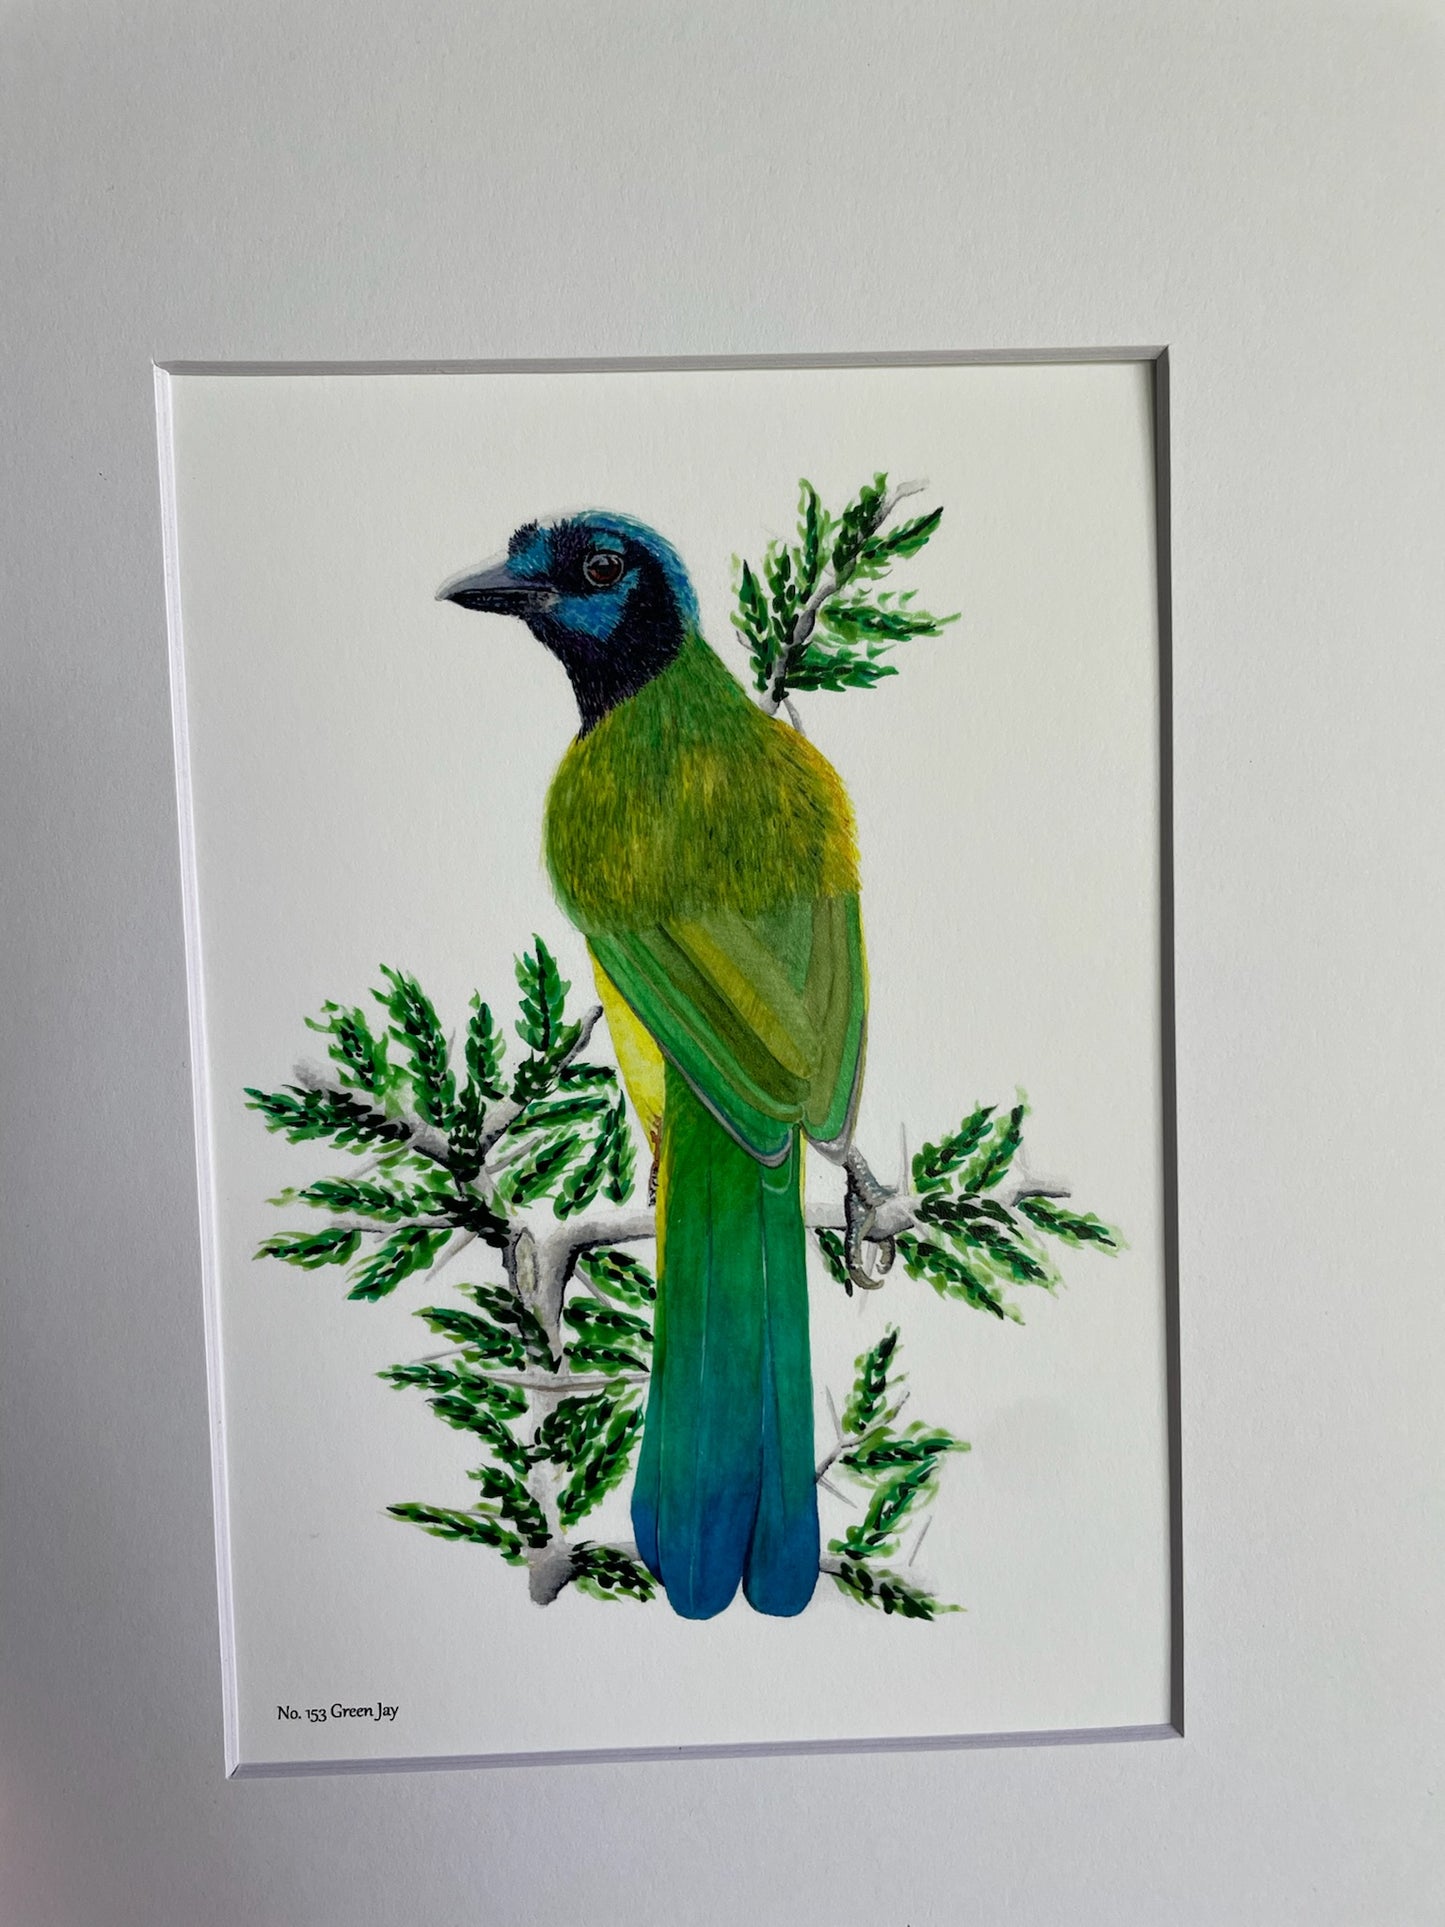 Green Jay - Bird Art by KB - Giclee Print with White Mat